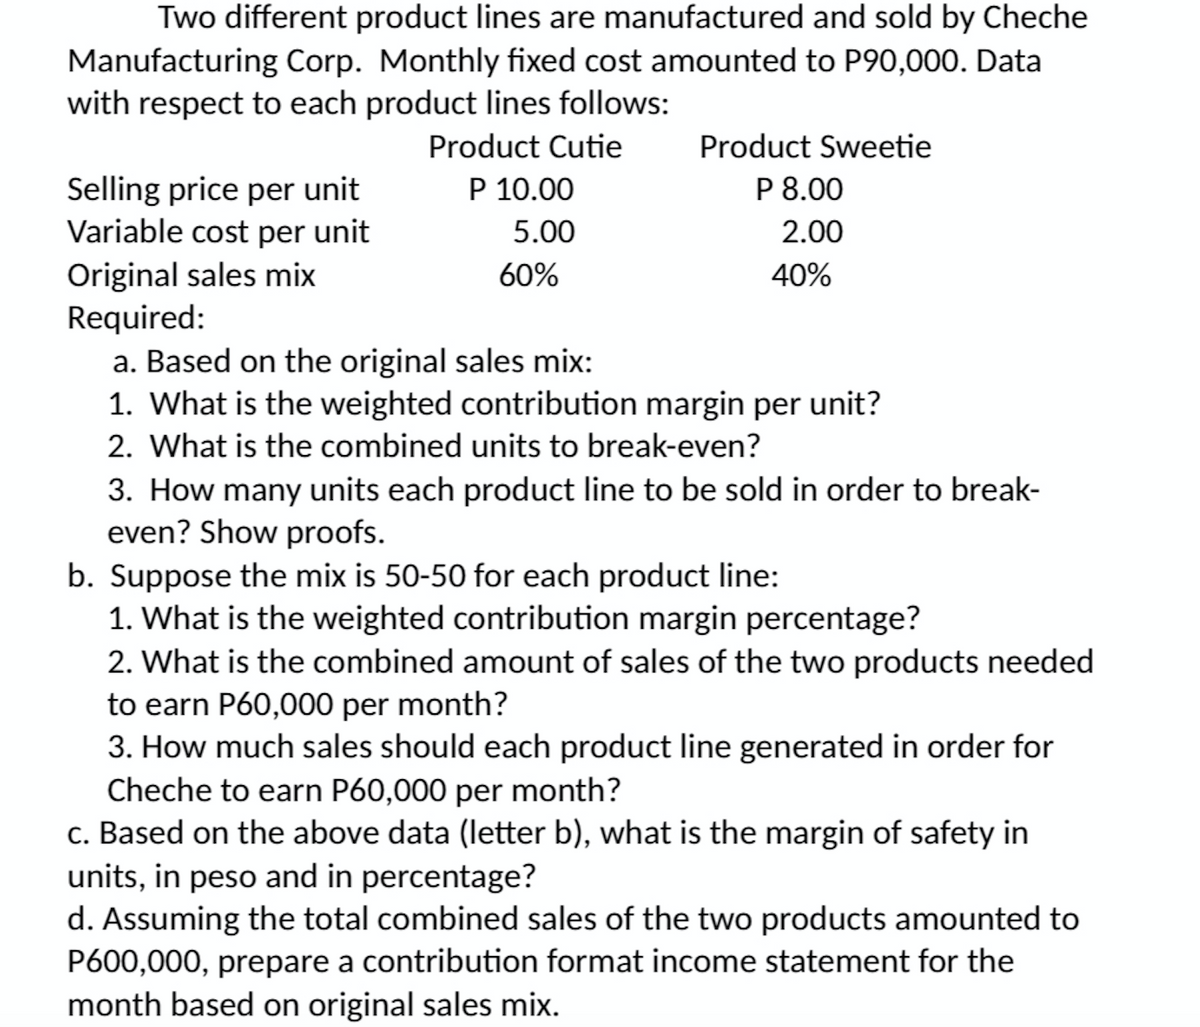 Two different product lines are manufactured and sold by Cheche
Manufacturing Corp. Monthly fixed cost amounted to P90,000. Data
with respect to each product lines follows:
Product Cutie
P 10.00
5.00
Product Sweetie
P 8.00
2.00
Selling price per unit
Variable cost per unit
Original sales mix
Required:
a. Based on the original sales mix:
1. What is the weighted contribution margin per unit?
2. What is the combined units to break-even?
60%
40%
3. How many units each product line to be sold in order to break-
even? Show proofs.
b. Suppose the mix is 50-50 for each product line:
1. What is the weighted contribution margin percentage?
2. What is the combined amount of sales of the two products needed
to earn P60,000 per month?
3. How much sales should each product line generated in order for
Cheche to earn P60,000 per month?
c. Based on the above data (letter b), what is the margin of safety in
units, in peso and in percentage?
d. Assuming the total combined sales of the two products amounted to
P600,000, prepare a contribution format income statement for the
month based on original sales mix.